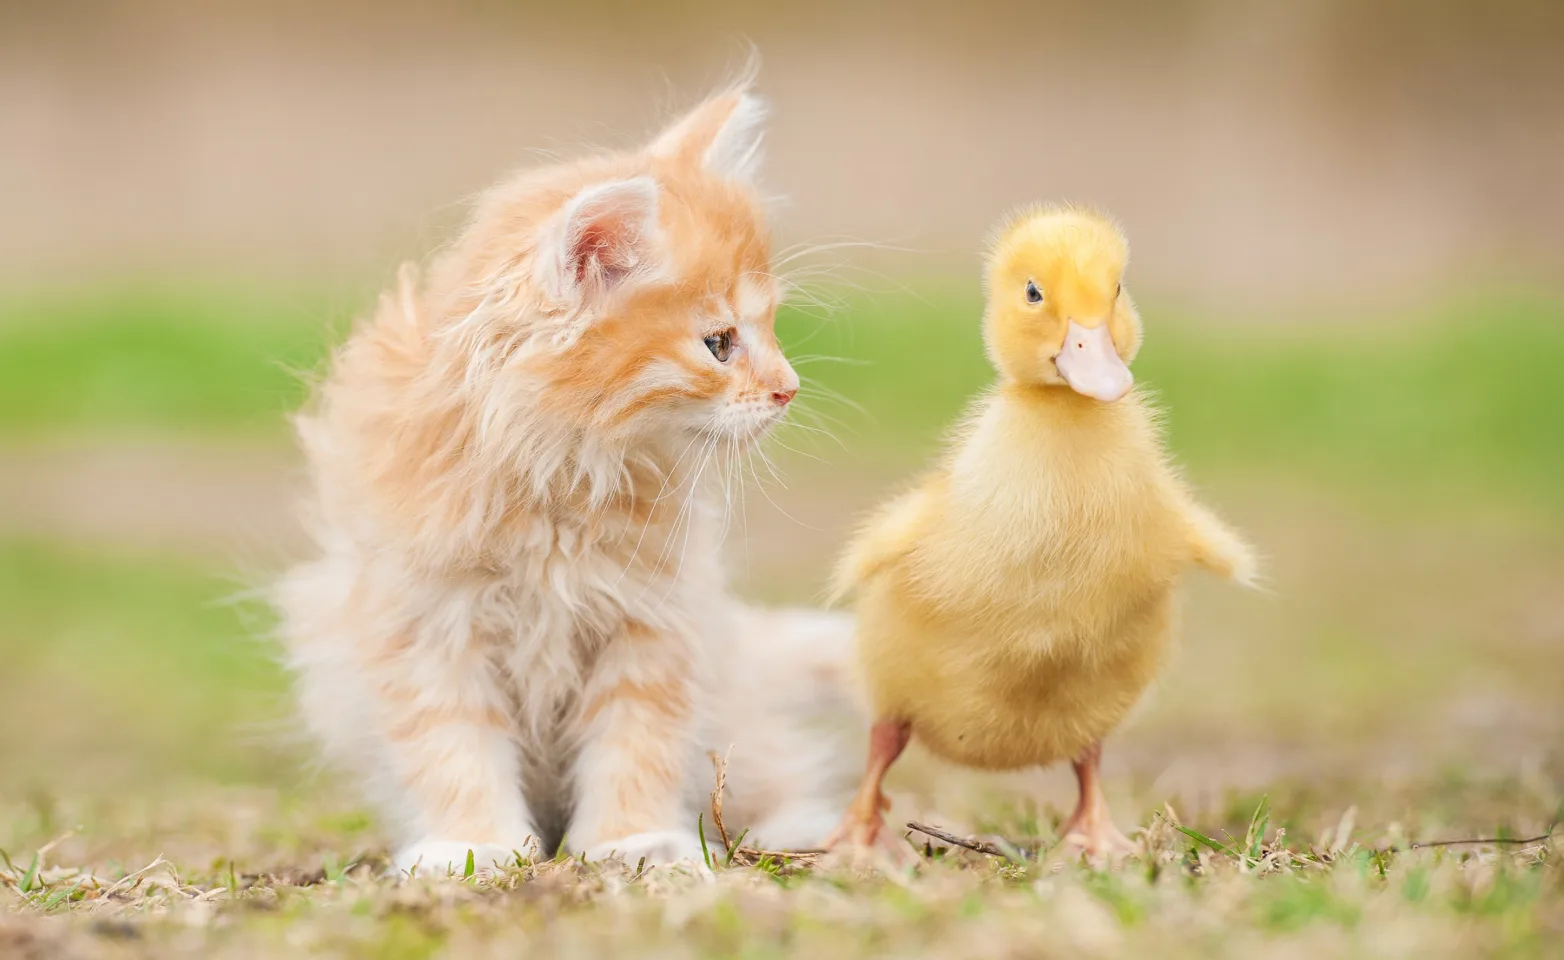 Cat and a duck